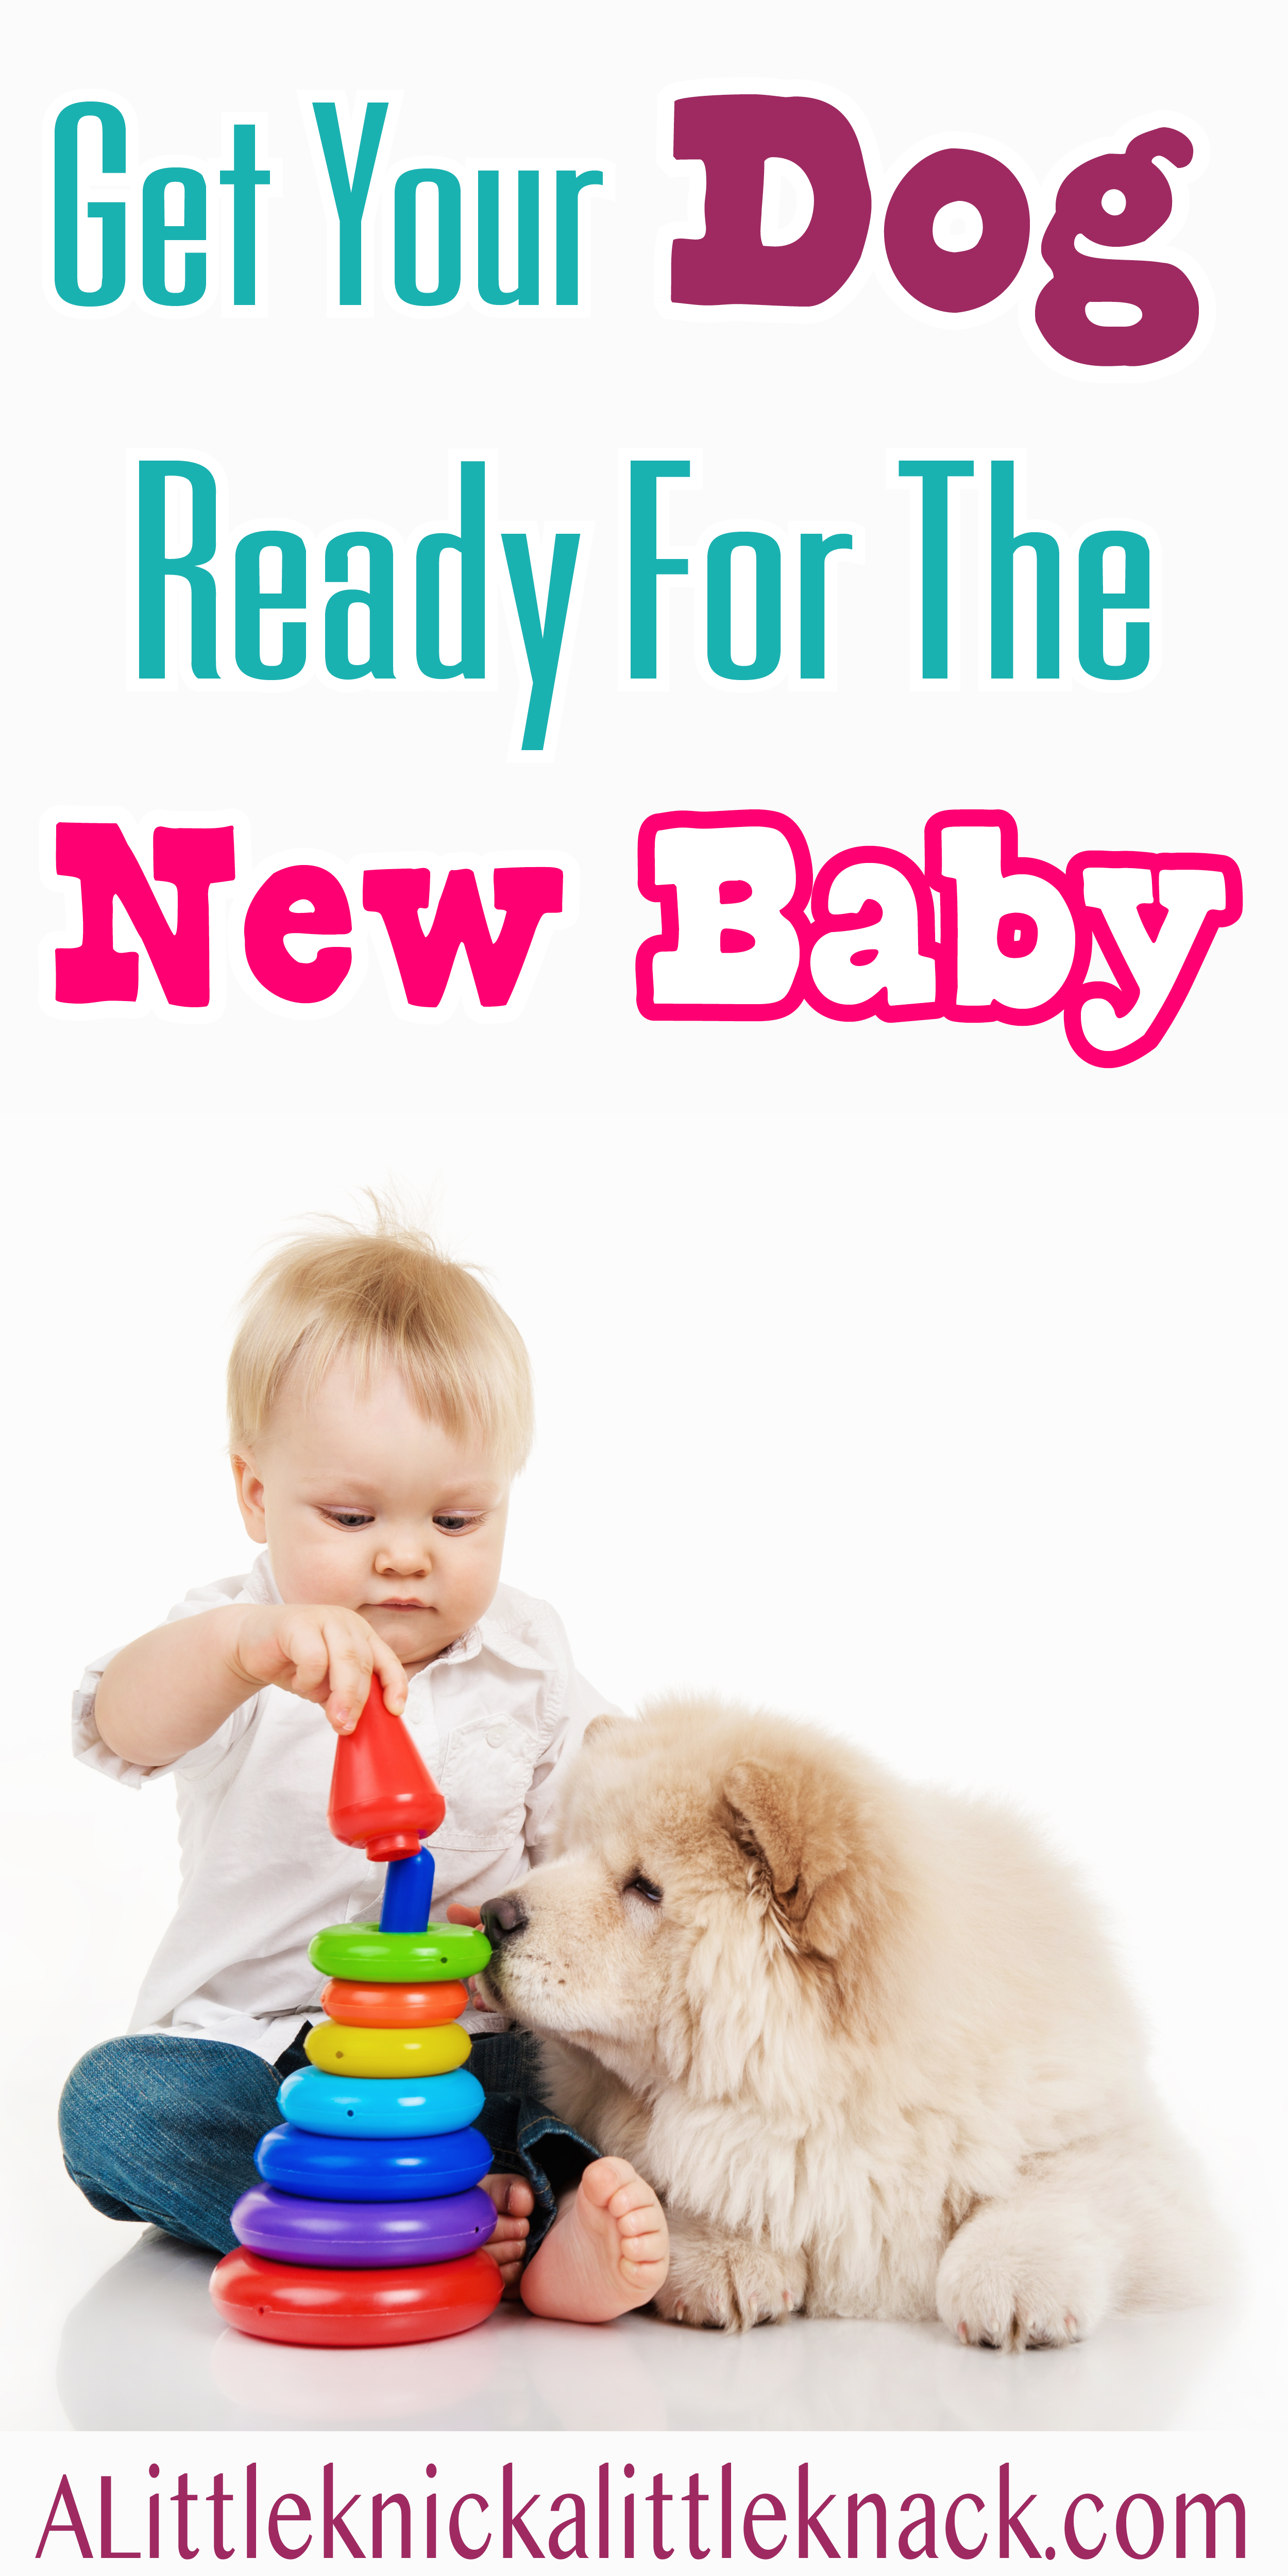 A baby playing with a toy next to a furry dog with a text overlay.